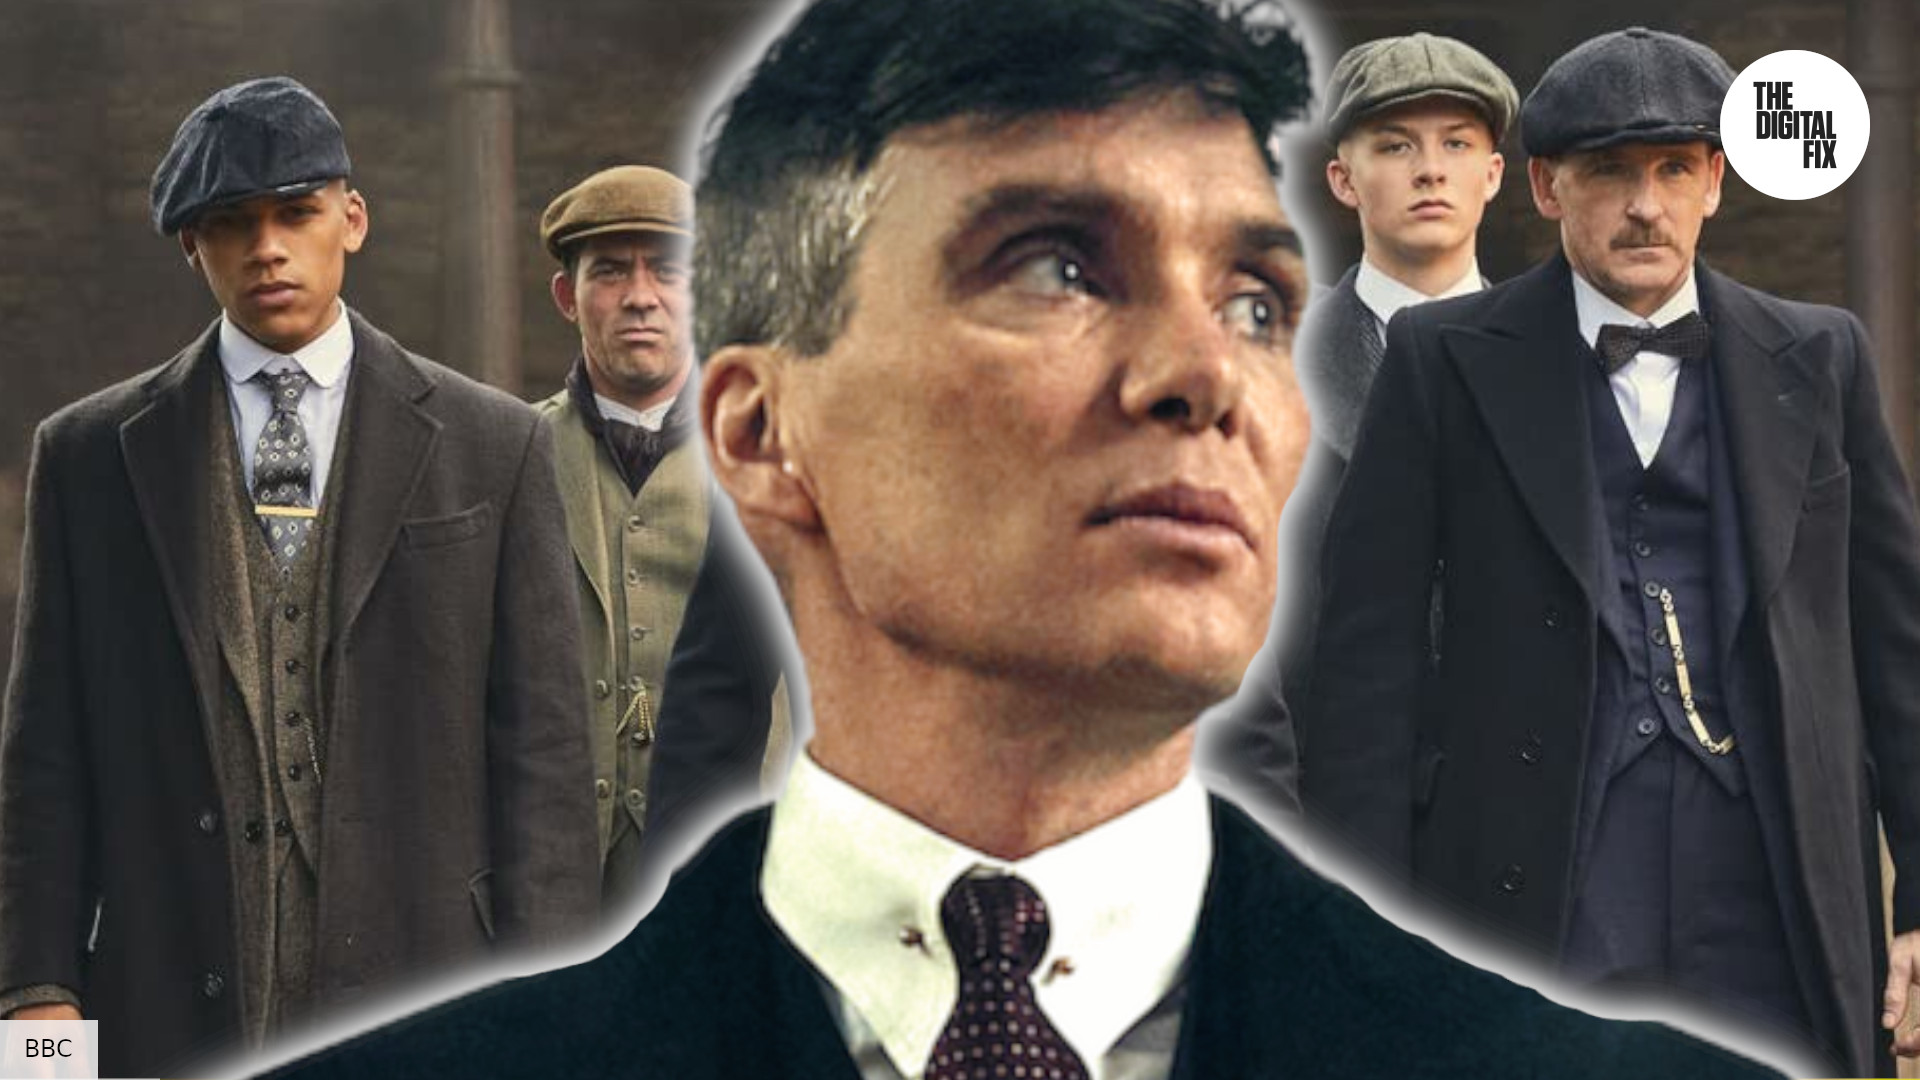 Peaky Blinders Creator Marks Tenth Anniversary With Exciting Tease The Digital Fix 